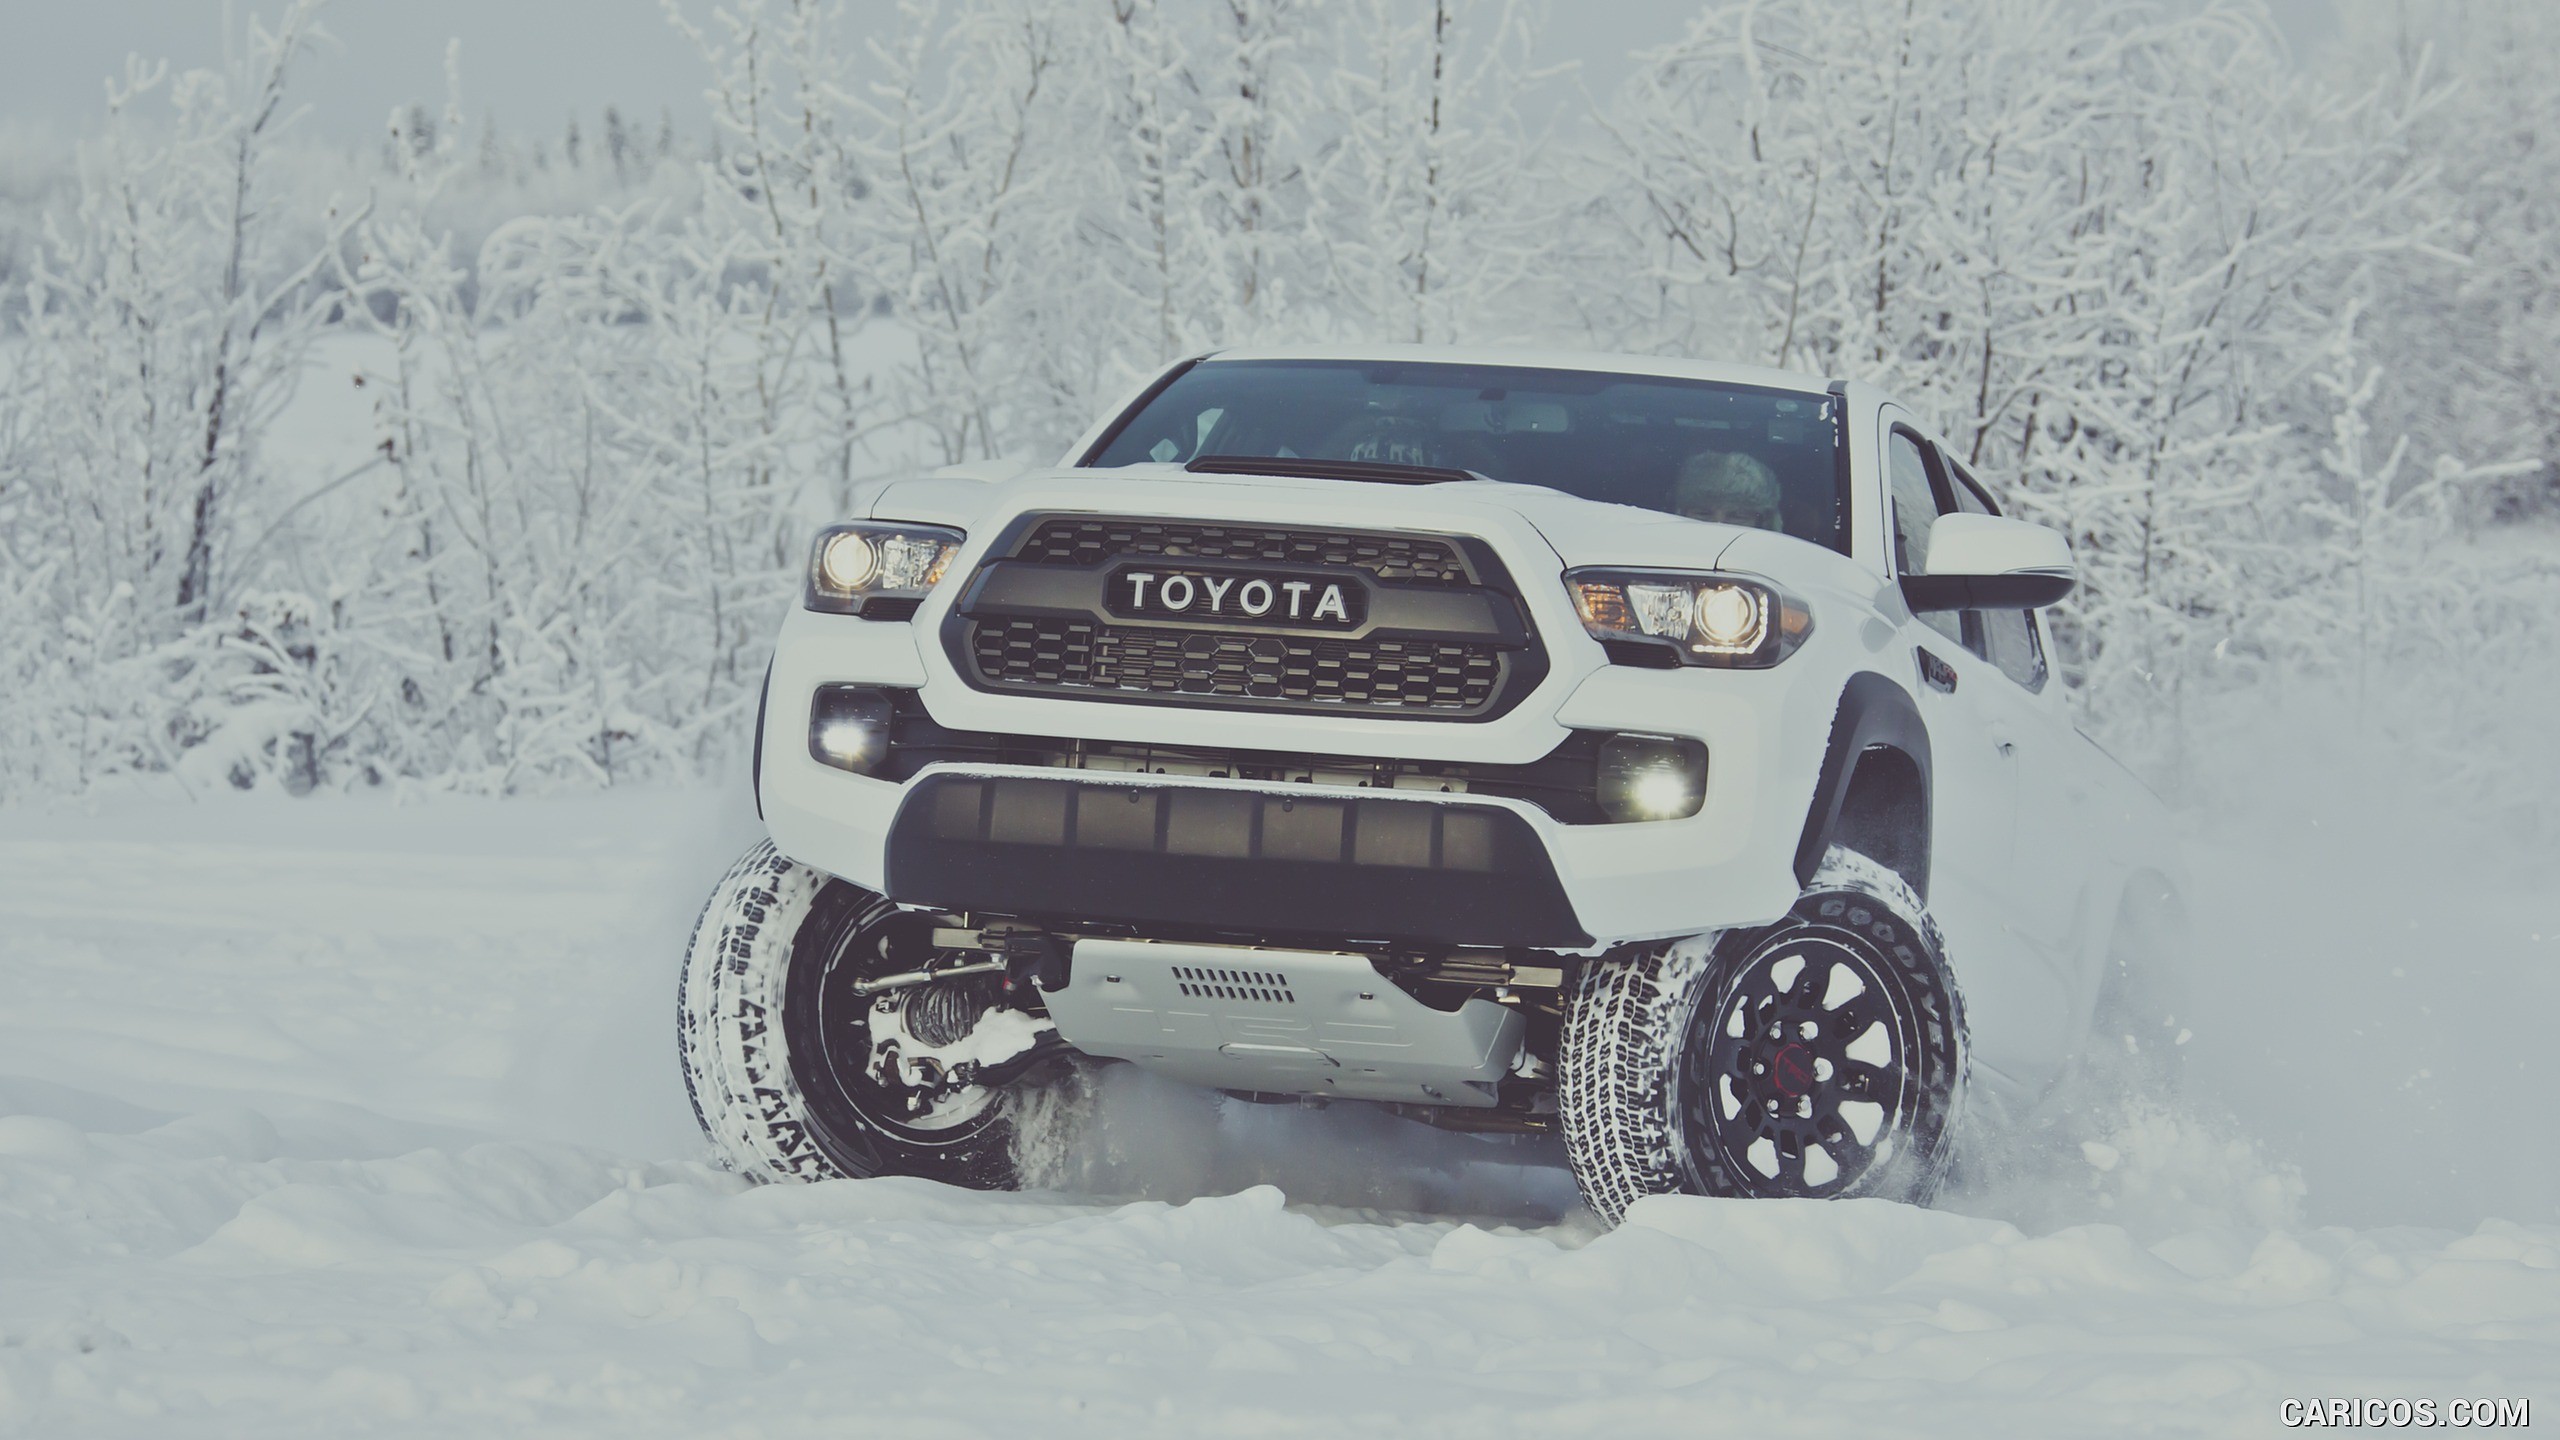 2560x1440 2017 Toyota Tacoma TRD Pro in Snow - Front | HD Wallpaper #4